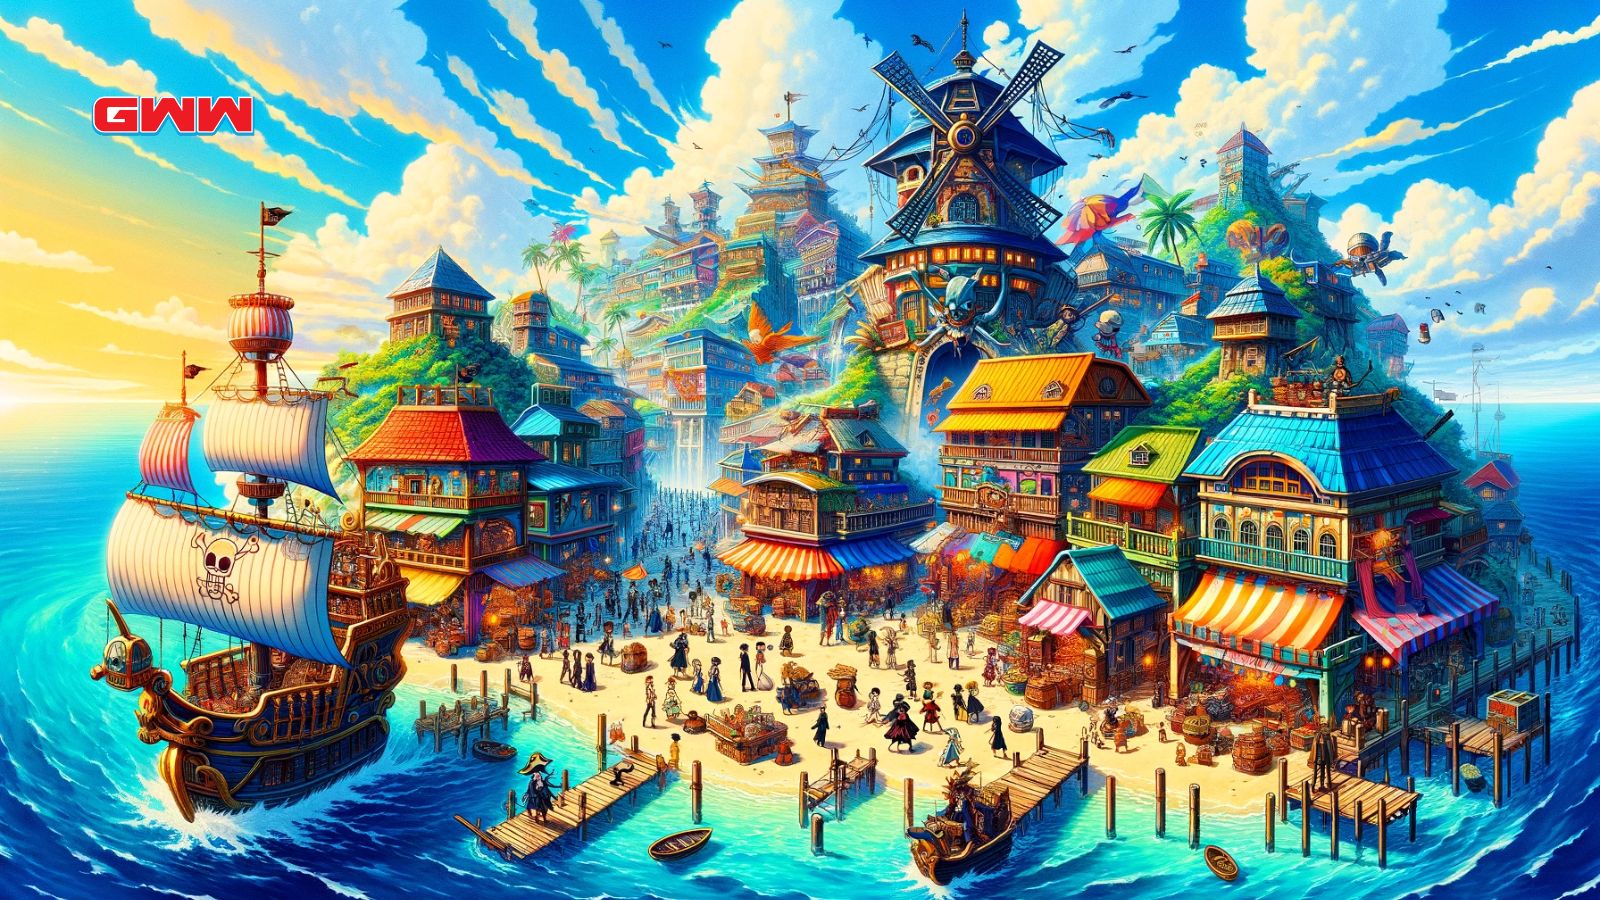 An imaginative and vivid anime-style depiction of an iconic scene from a pirate-themed anime series